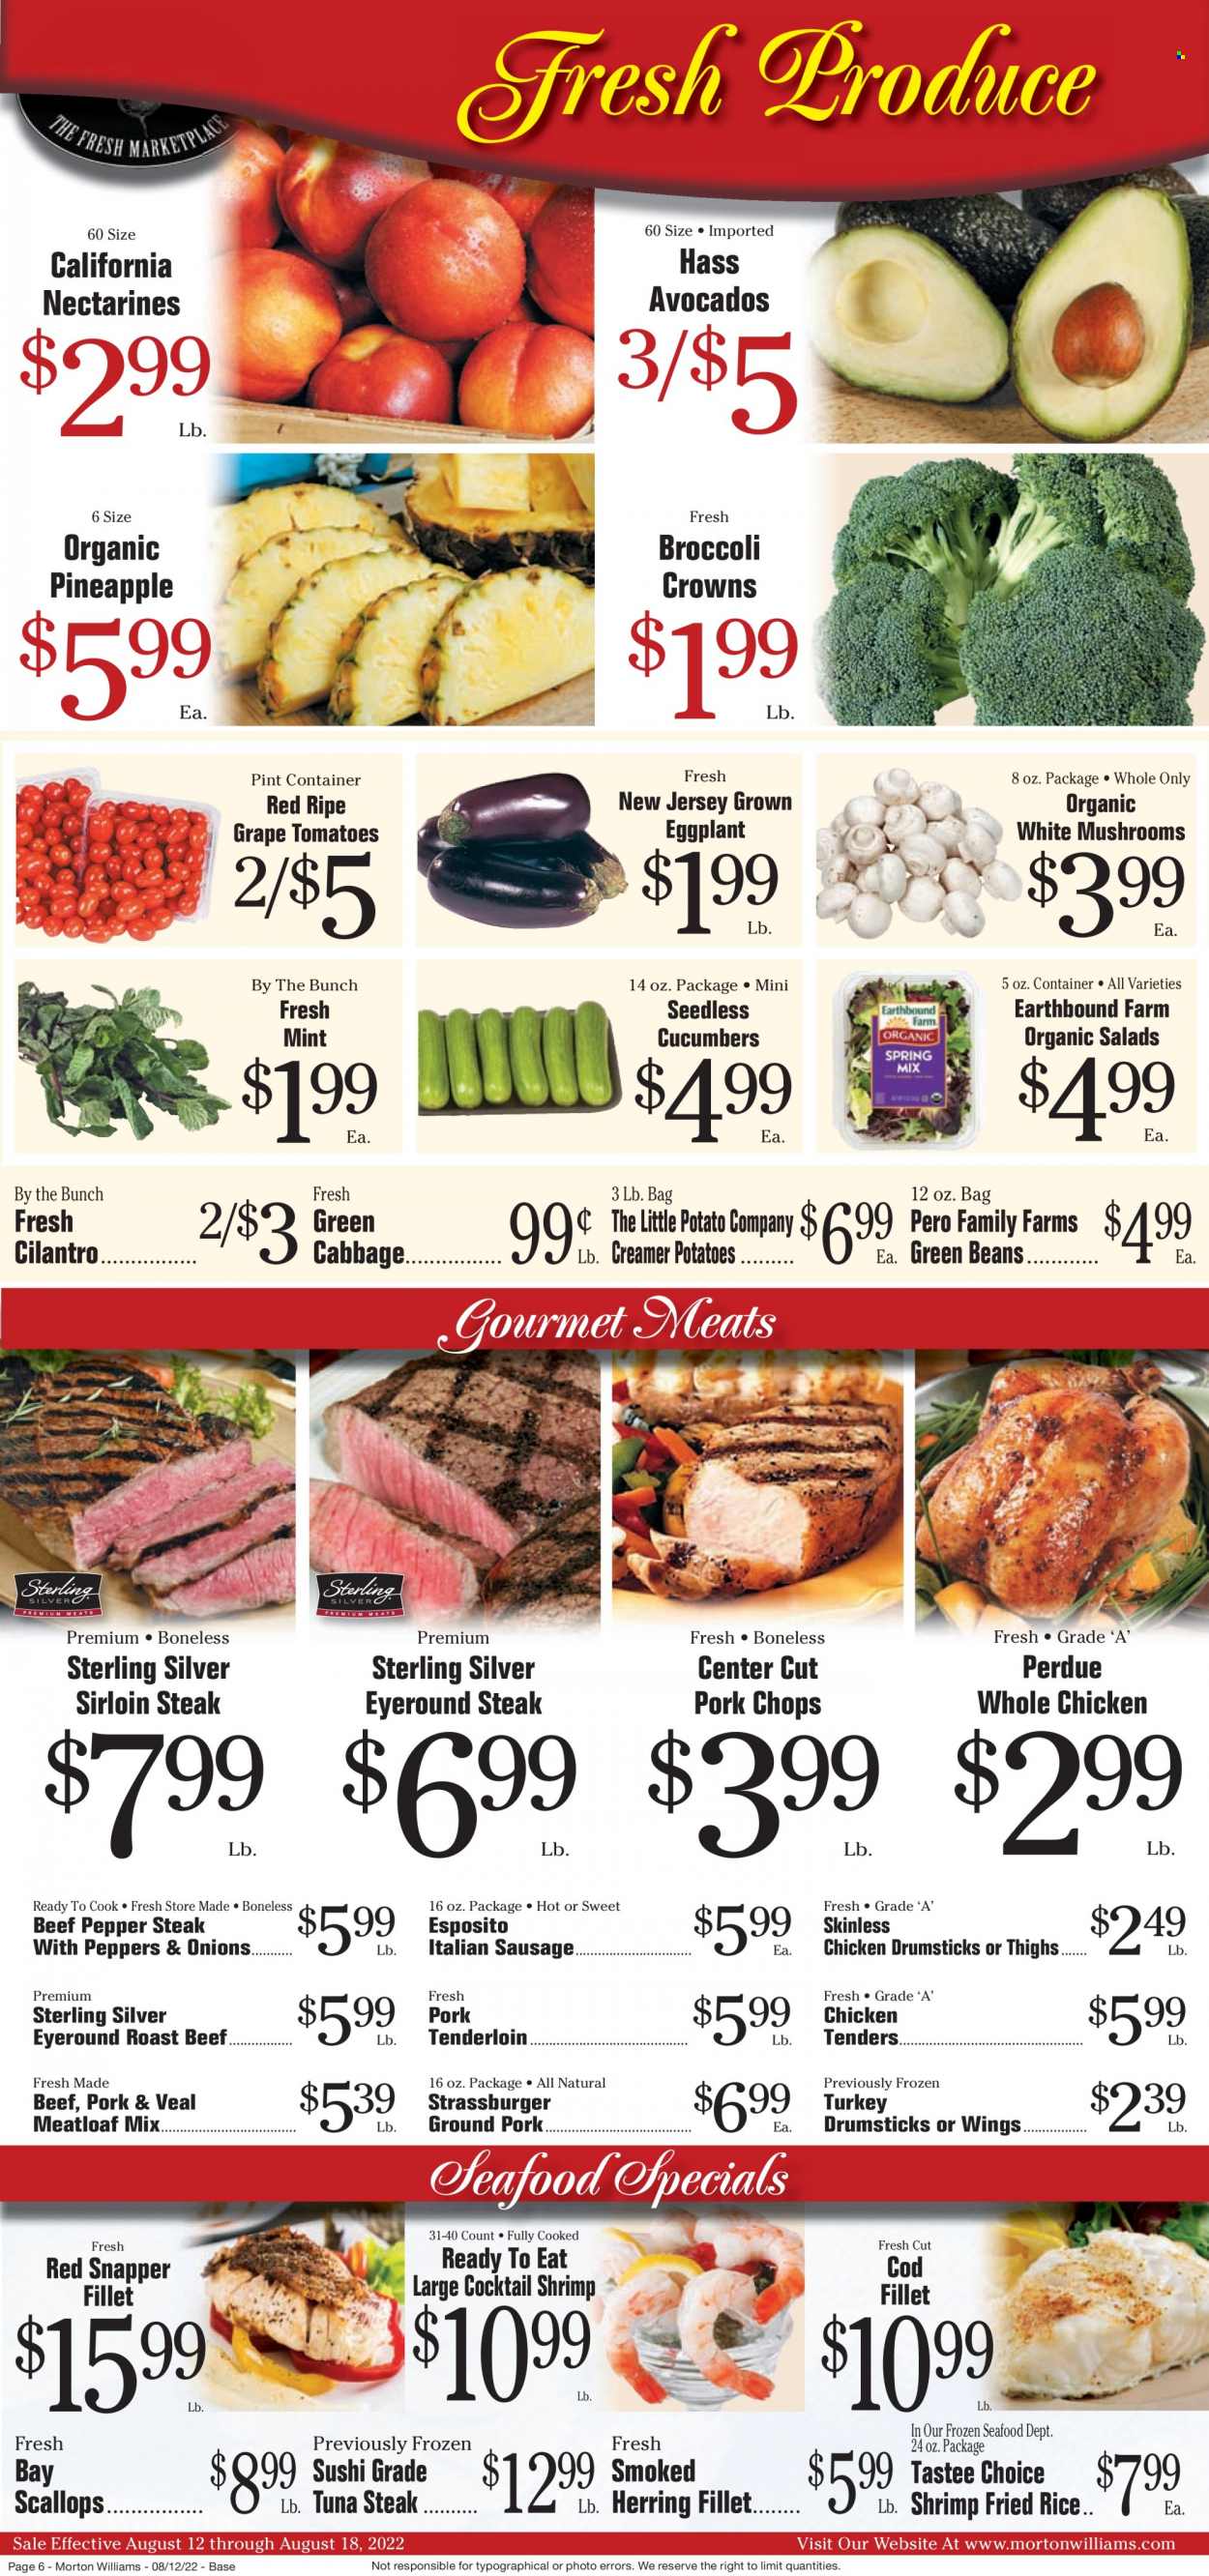 thumbnail - Morton Williams Flyer - 08/12/2022 - 08/18/2022 - Sales products - mushrooms, beans, cabbage, cucumber, green beans, tomatoes, potatoes, onion, salad, eggplant, avocado, pineapple, cod, red snapper, scallops, tuna, herring, seafood, shrimps, chicken tenders, meatloaf, Perdue®, sausage, italian sausage, tuna steak, cilantro, whole chicken, chicken drumsticks, turkey drumsticks, beef meat, beef sirloin, steak, roast beef, sirloin steak, ground pork, pork chops, pork meat, pork tenderloin, nectarines. Page 6.